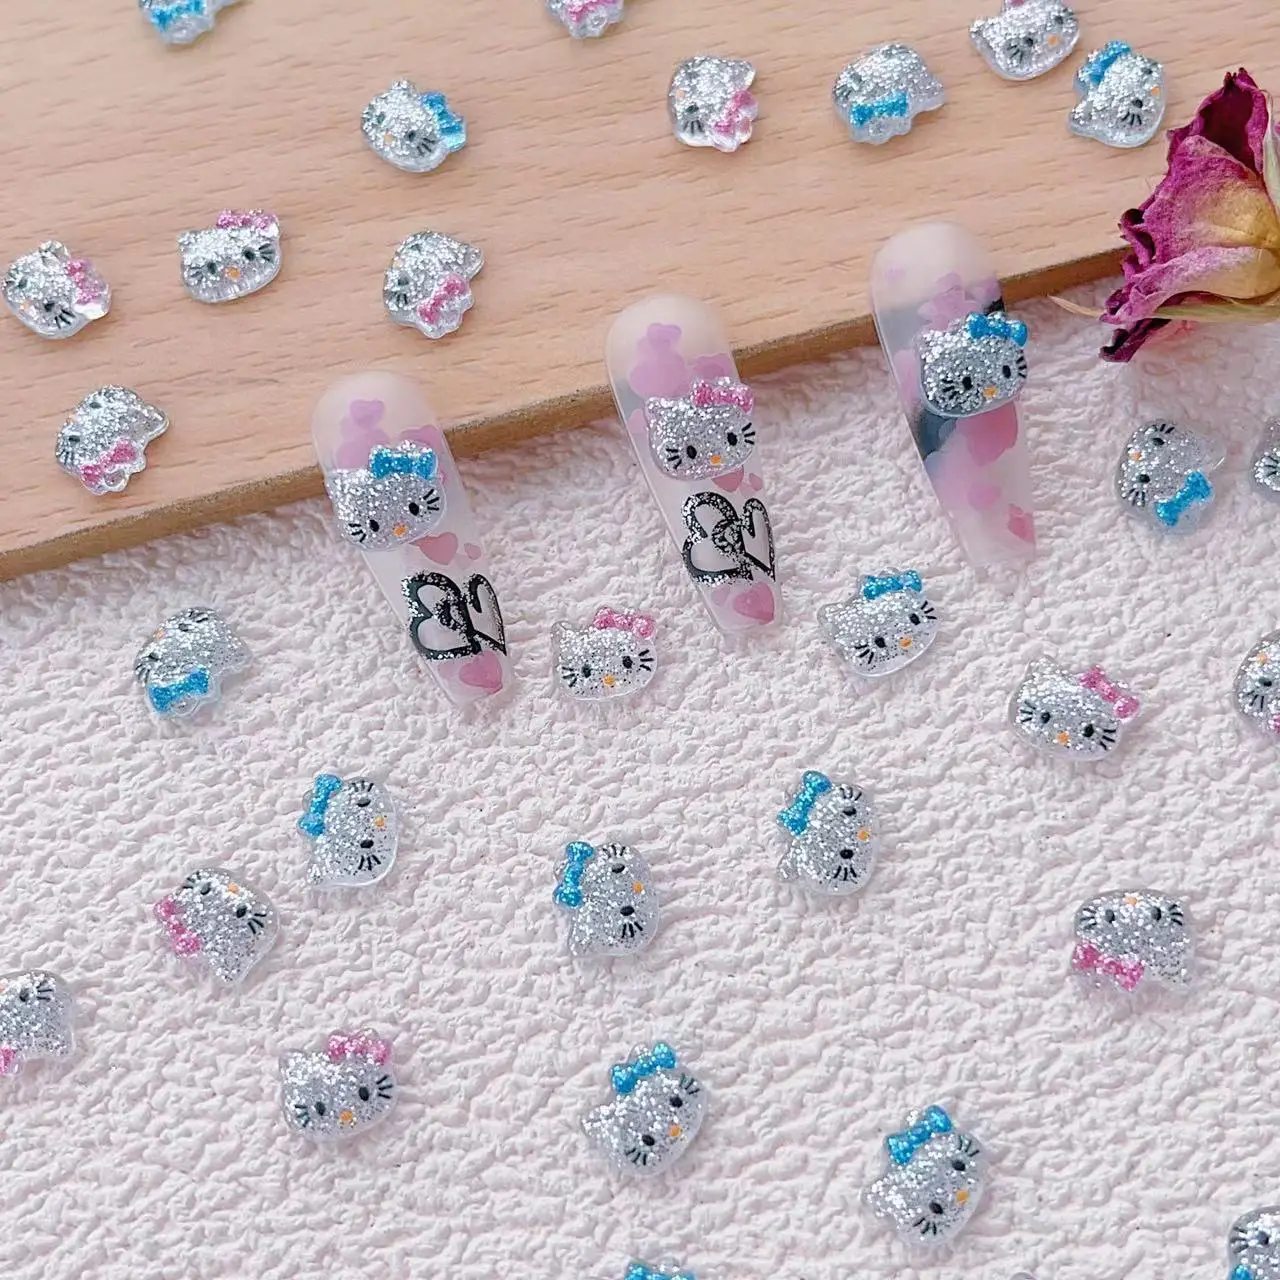 

20Pcs Sanrio Hello Kittys Nail Charms Kawaii Cartoon Phone Cases Jewelry Resin Milky White Patch Manicure Diy Accessories Gift